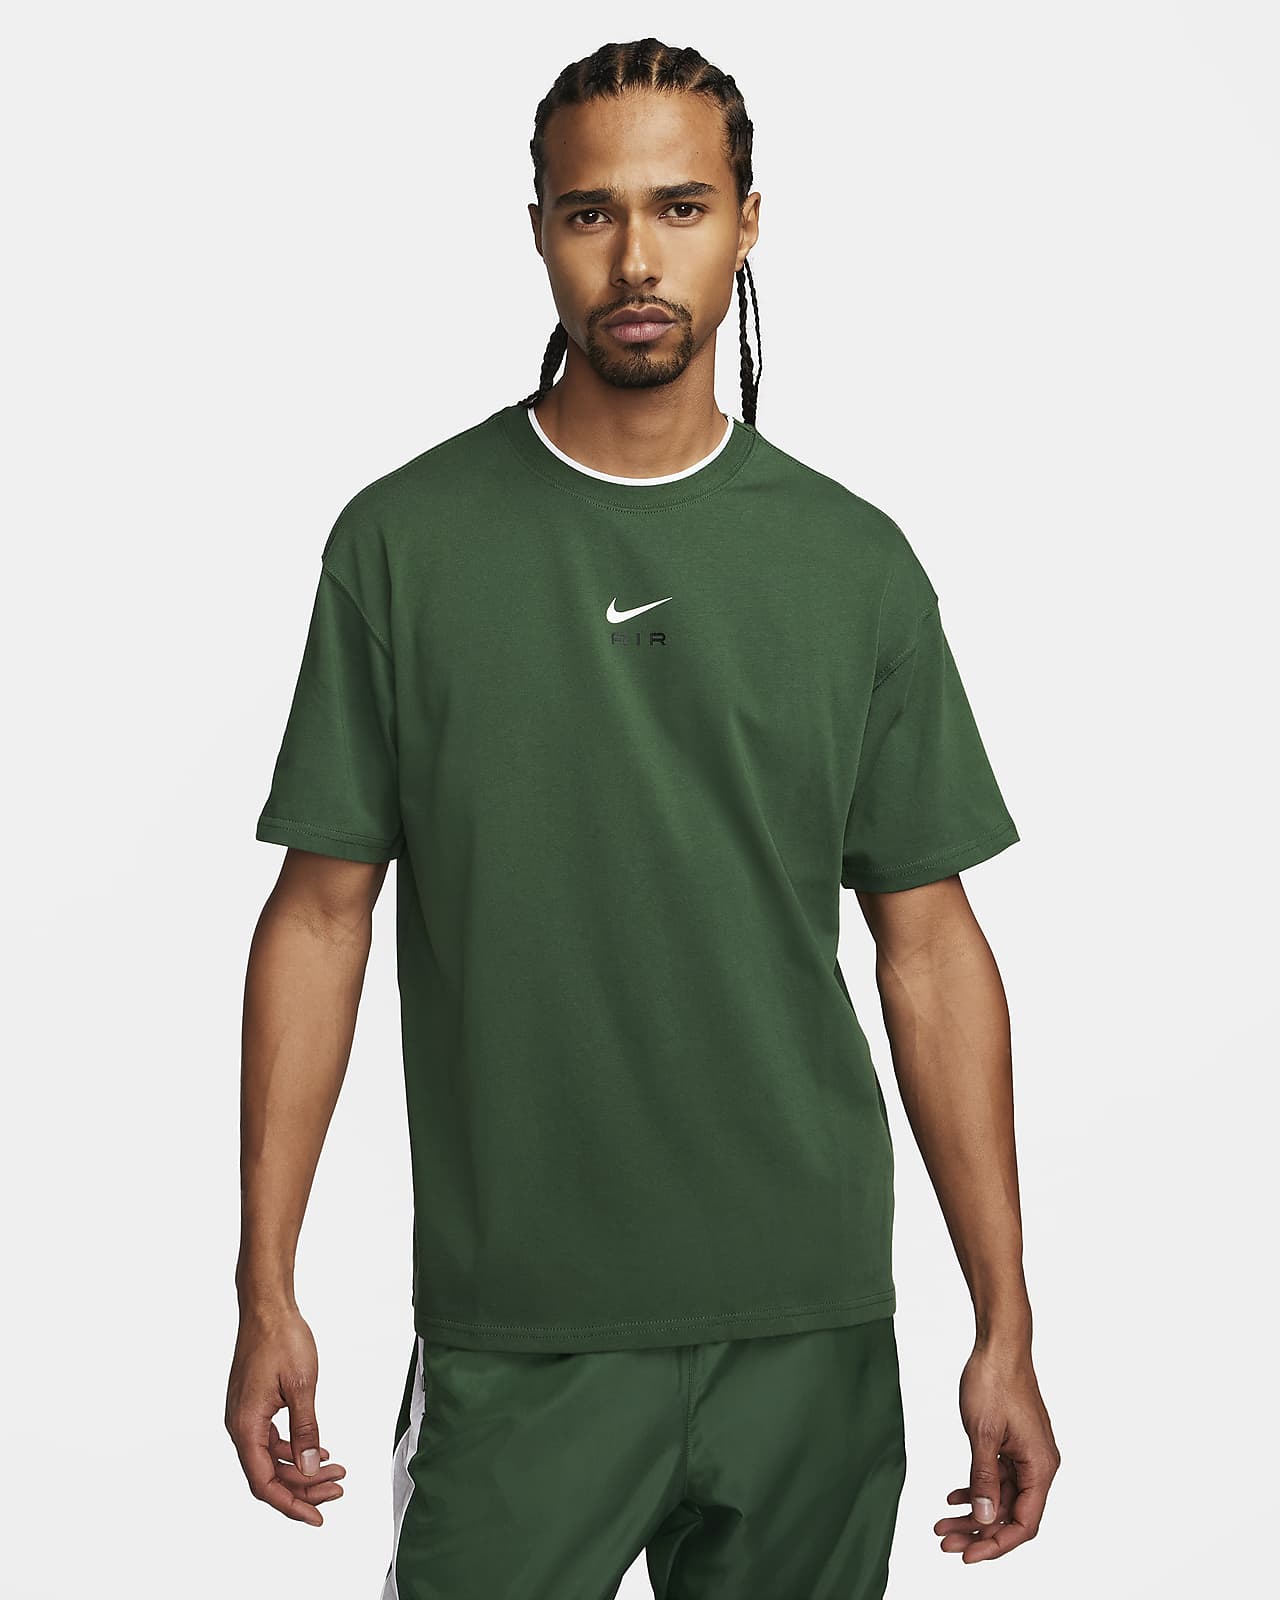 https://static.nike.com/a/images/t_PDP_1280_v1/f_auto,q_auto:eco/ae0dd5b8-91e4-4776-98ff-d347eb79fbb2/air-t-shirt-pMbFT9.png